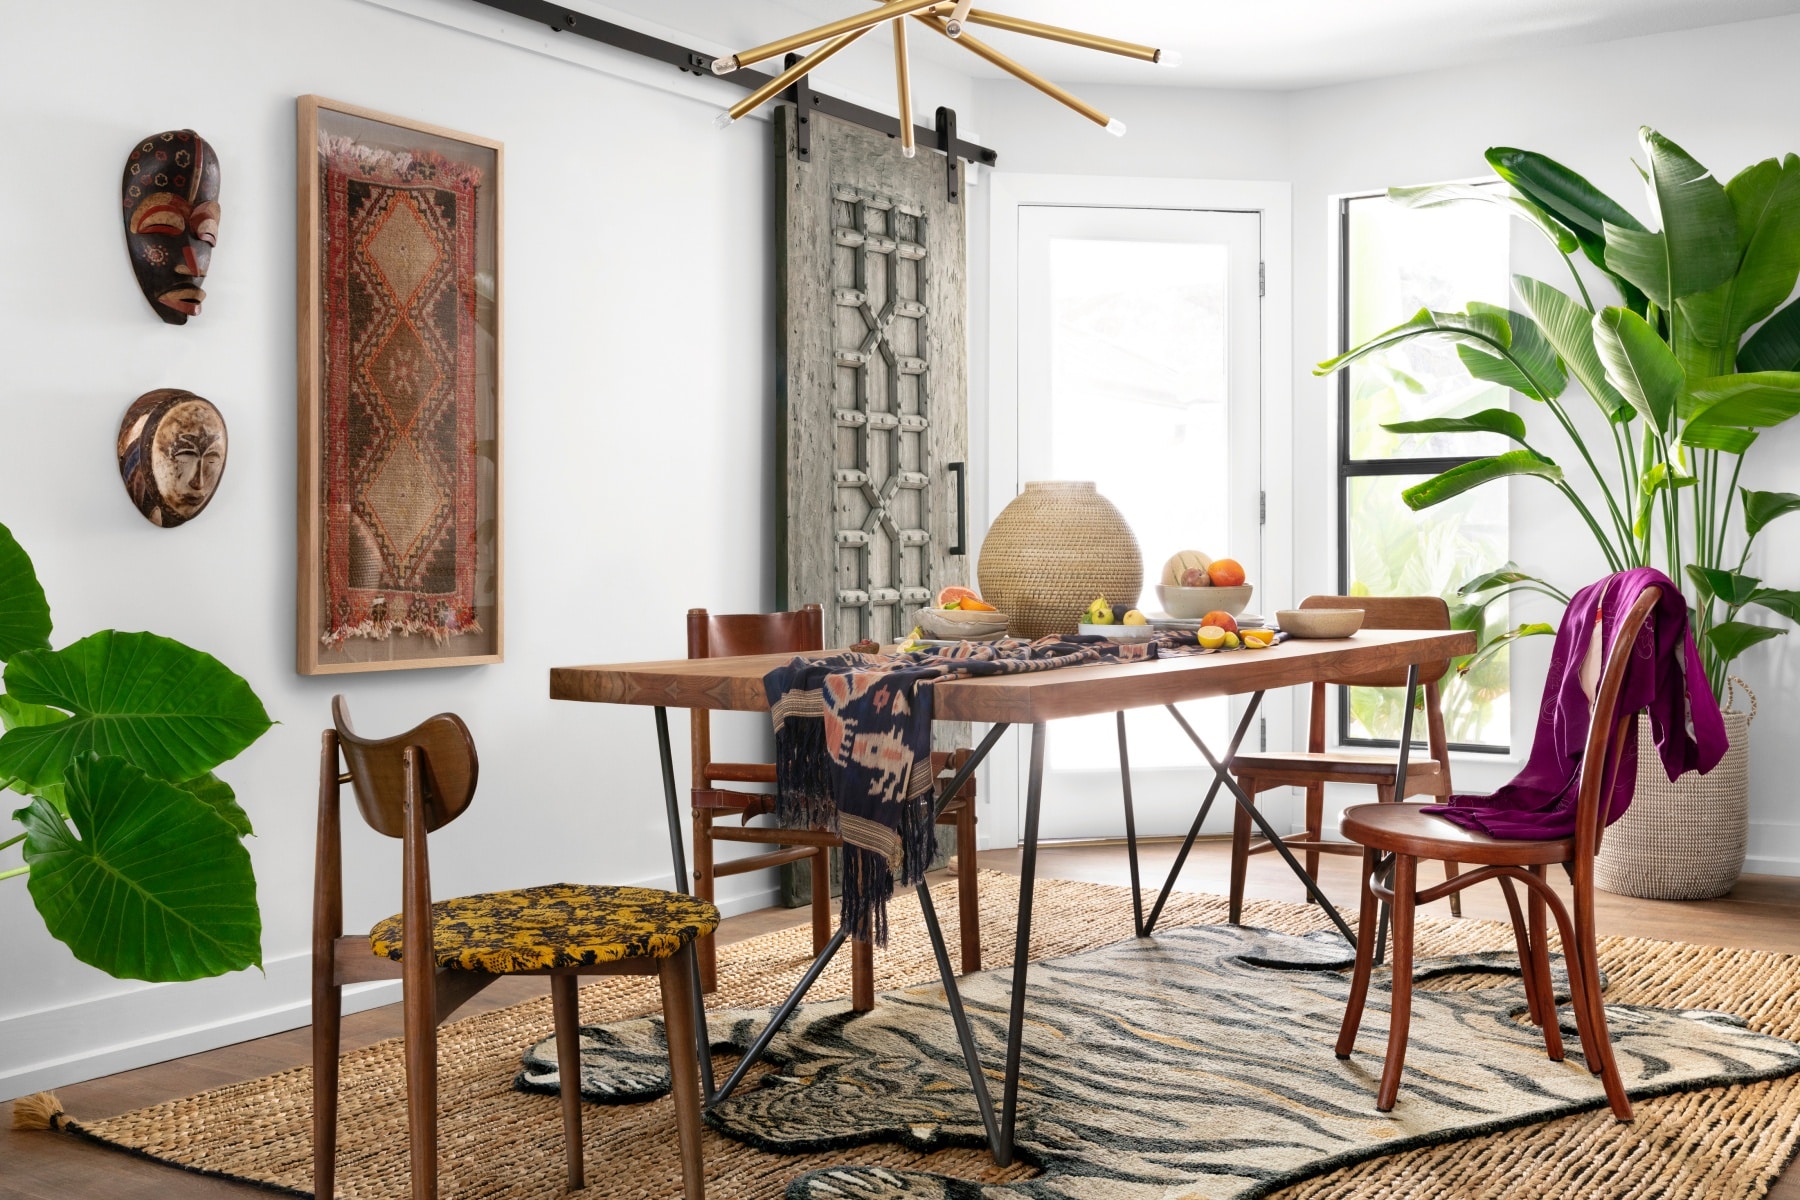 These 15 Bohemian Dining Tables Will Spice up Your Next Dinner Party!